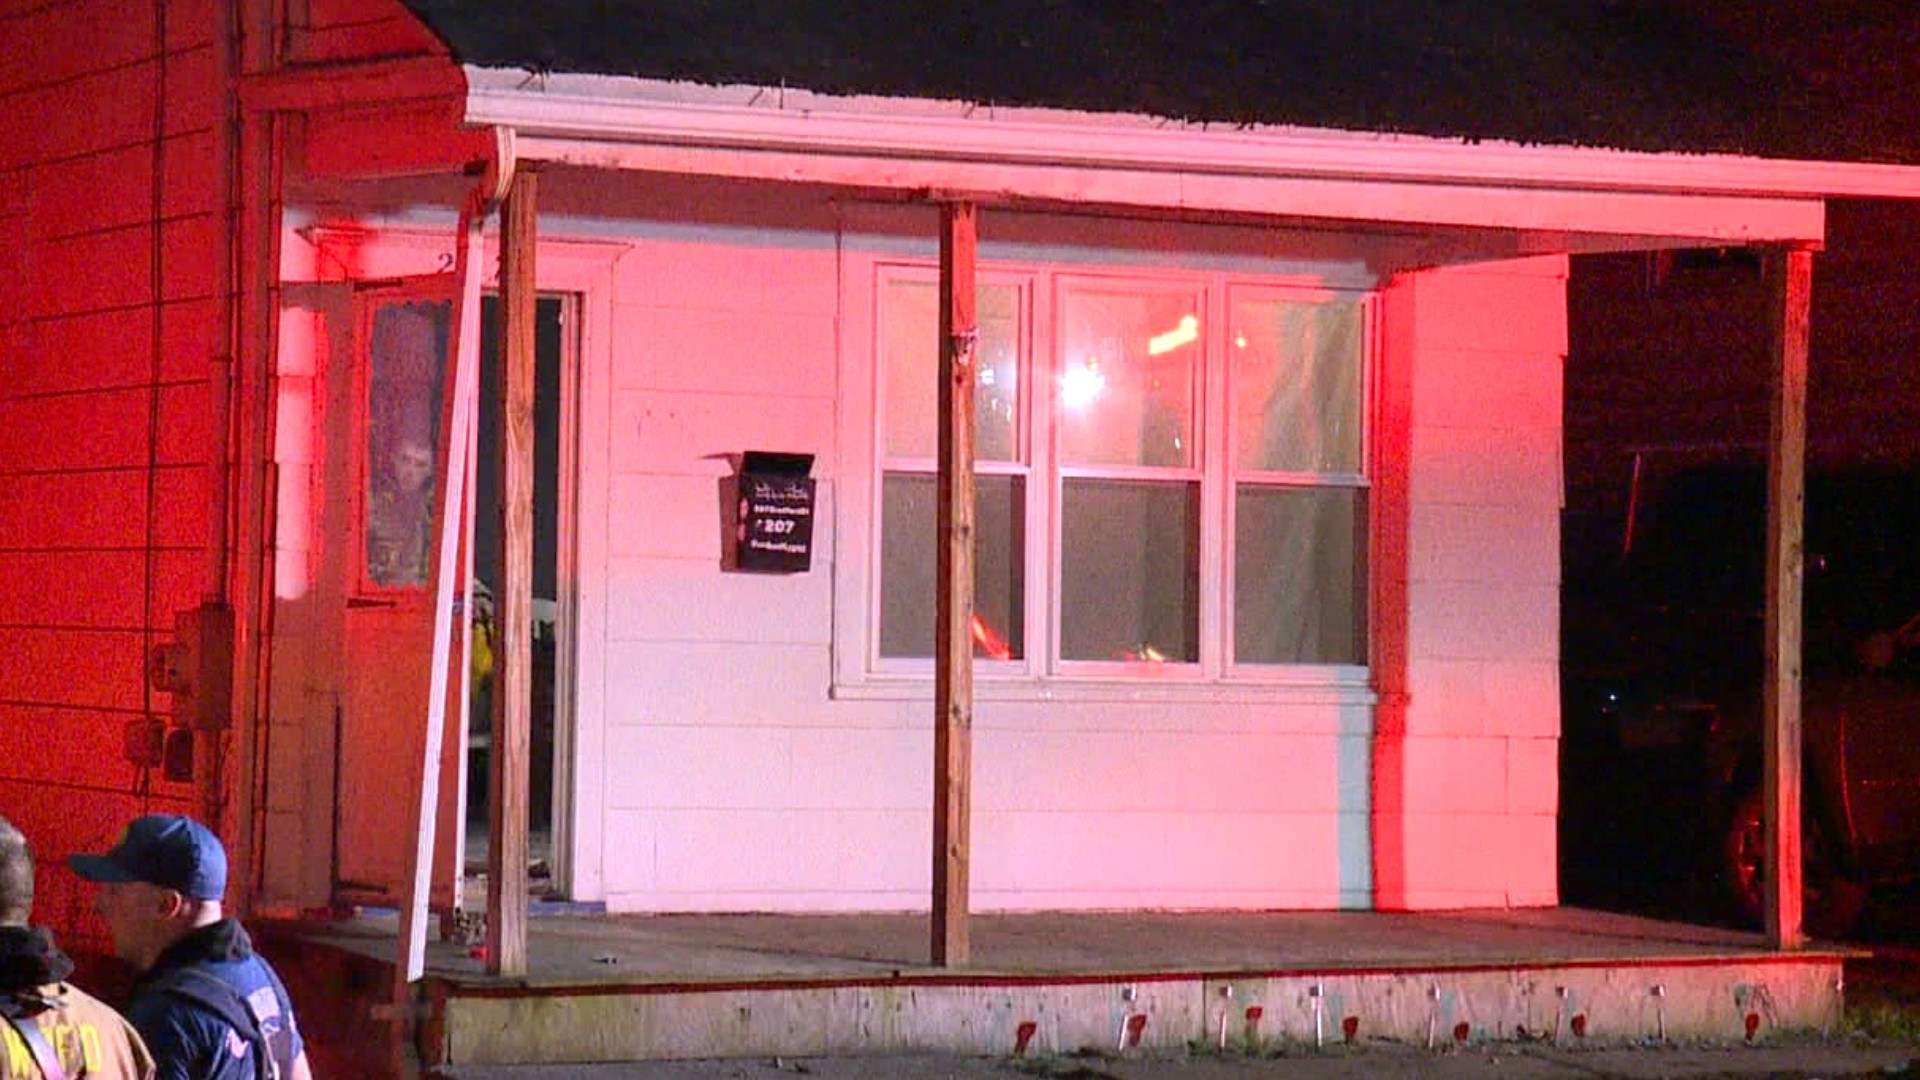 Fire crews were called to a home in Wilkes-Barre overnight